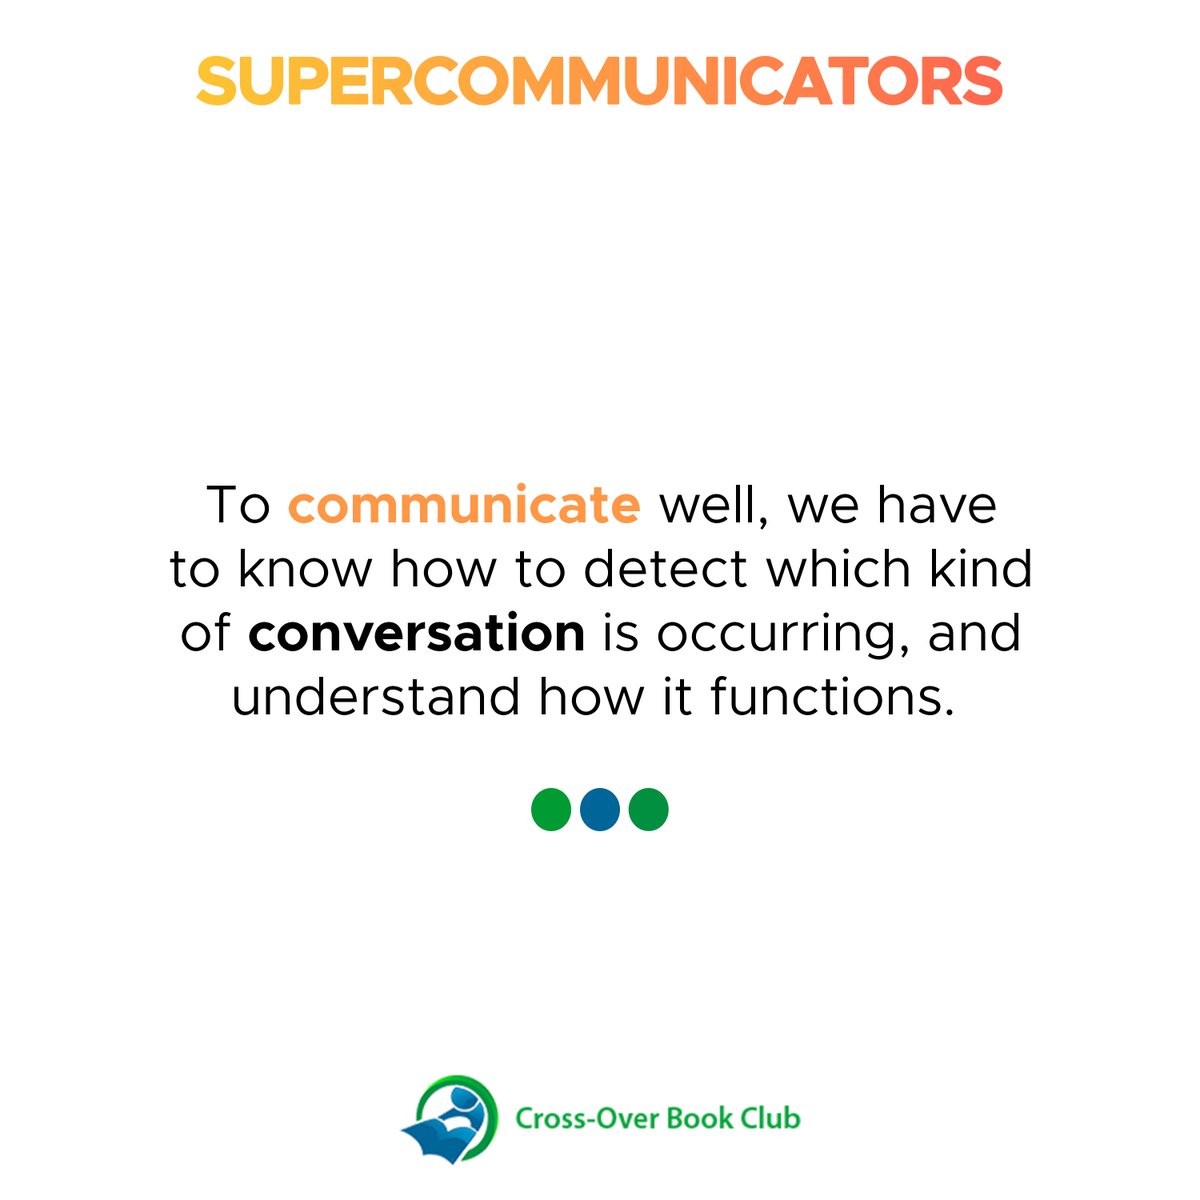 To communicate well, we have to know how to detect which kind of conversation is occurring, and understand how it functions.

#crossoverbookclub #April #readers #happyreading #supercommunicators #communication #charles #duhigg #book #conversation #Davido